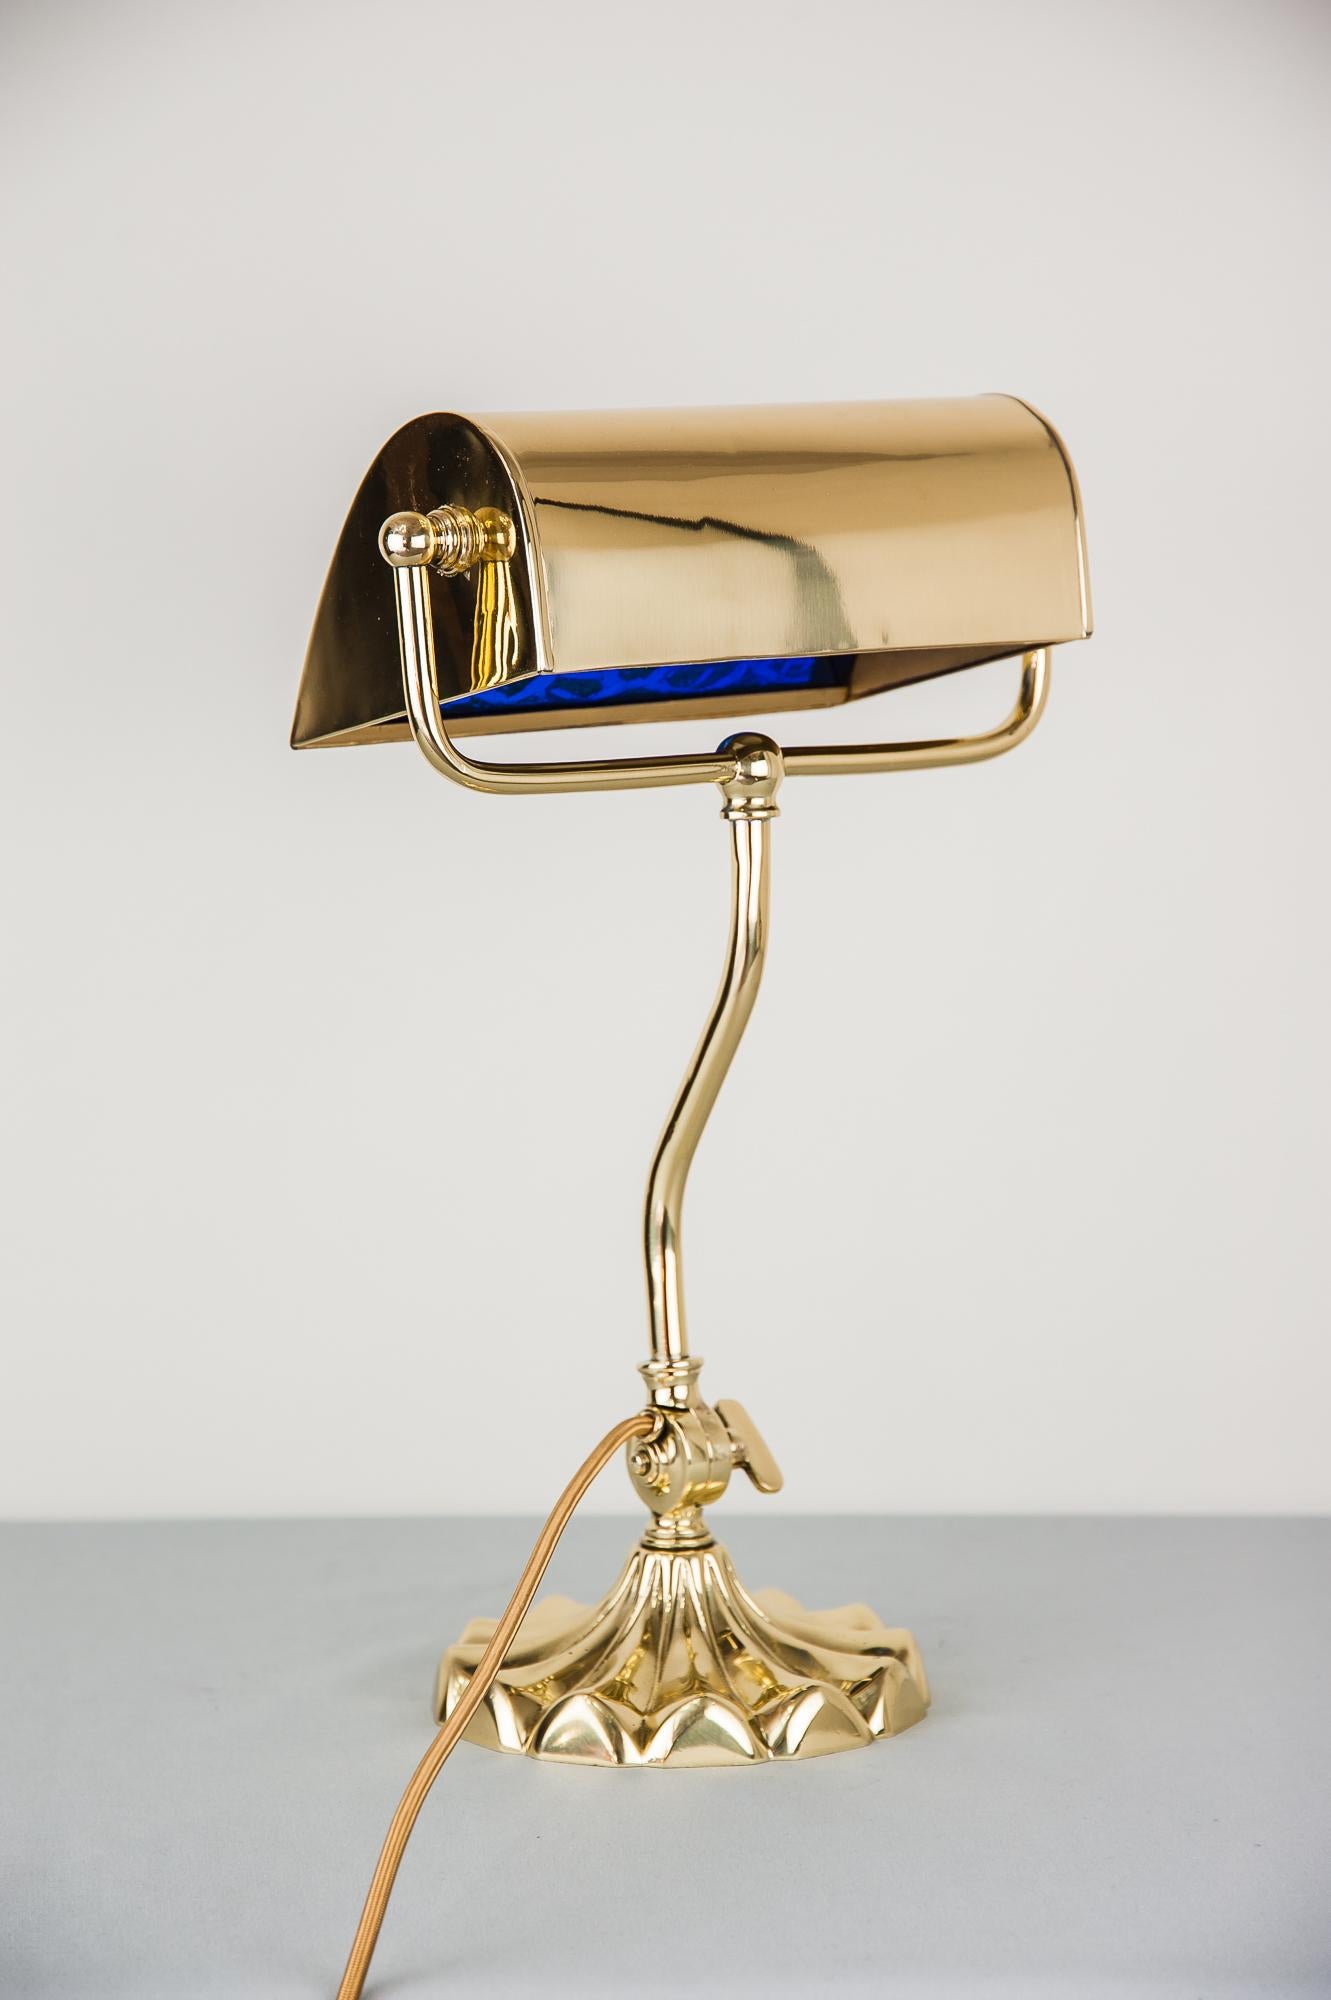 Early 20th Century Jugendstil Table Lamp circa 1909 with Original Lötz Glass